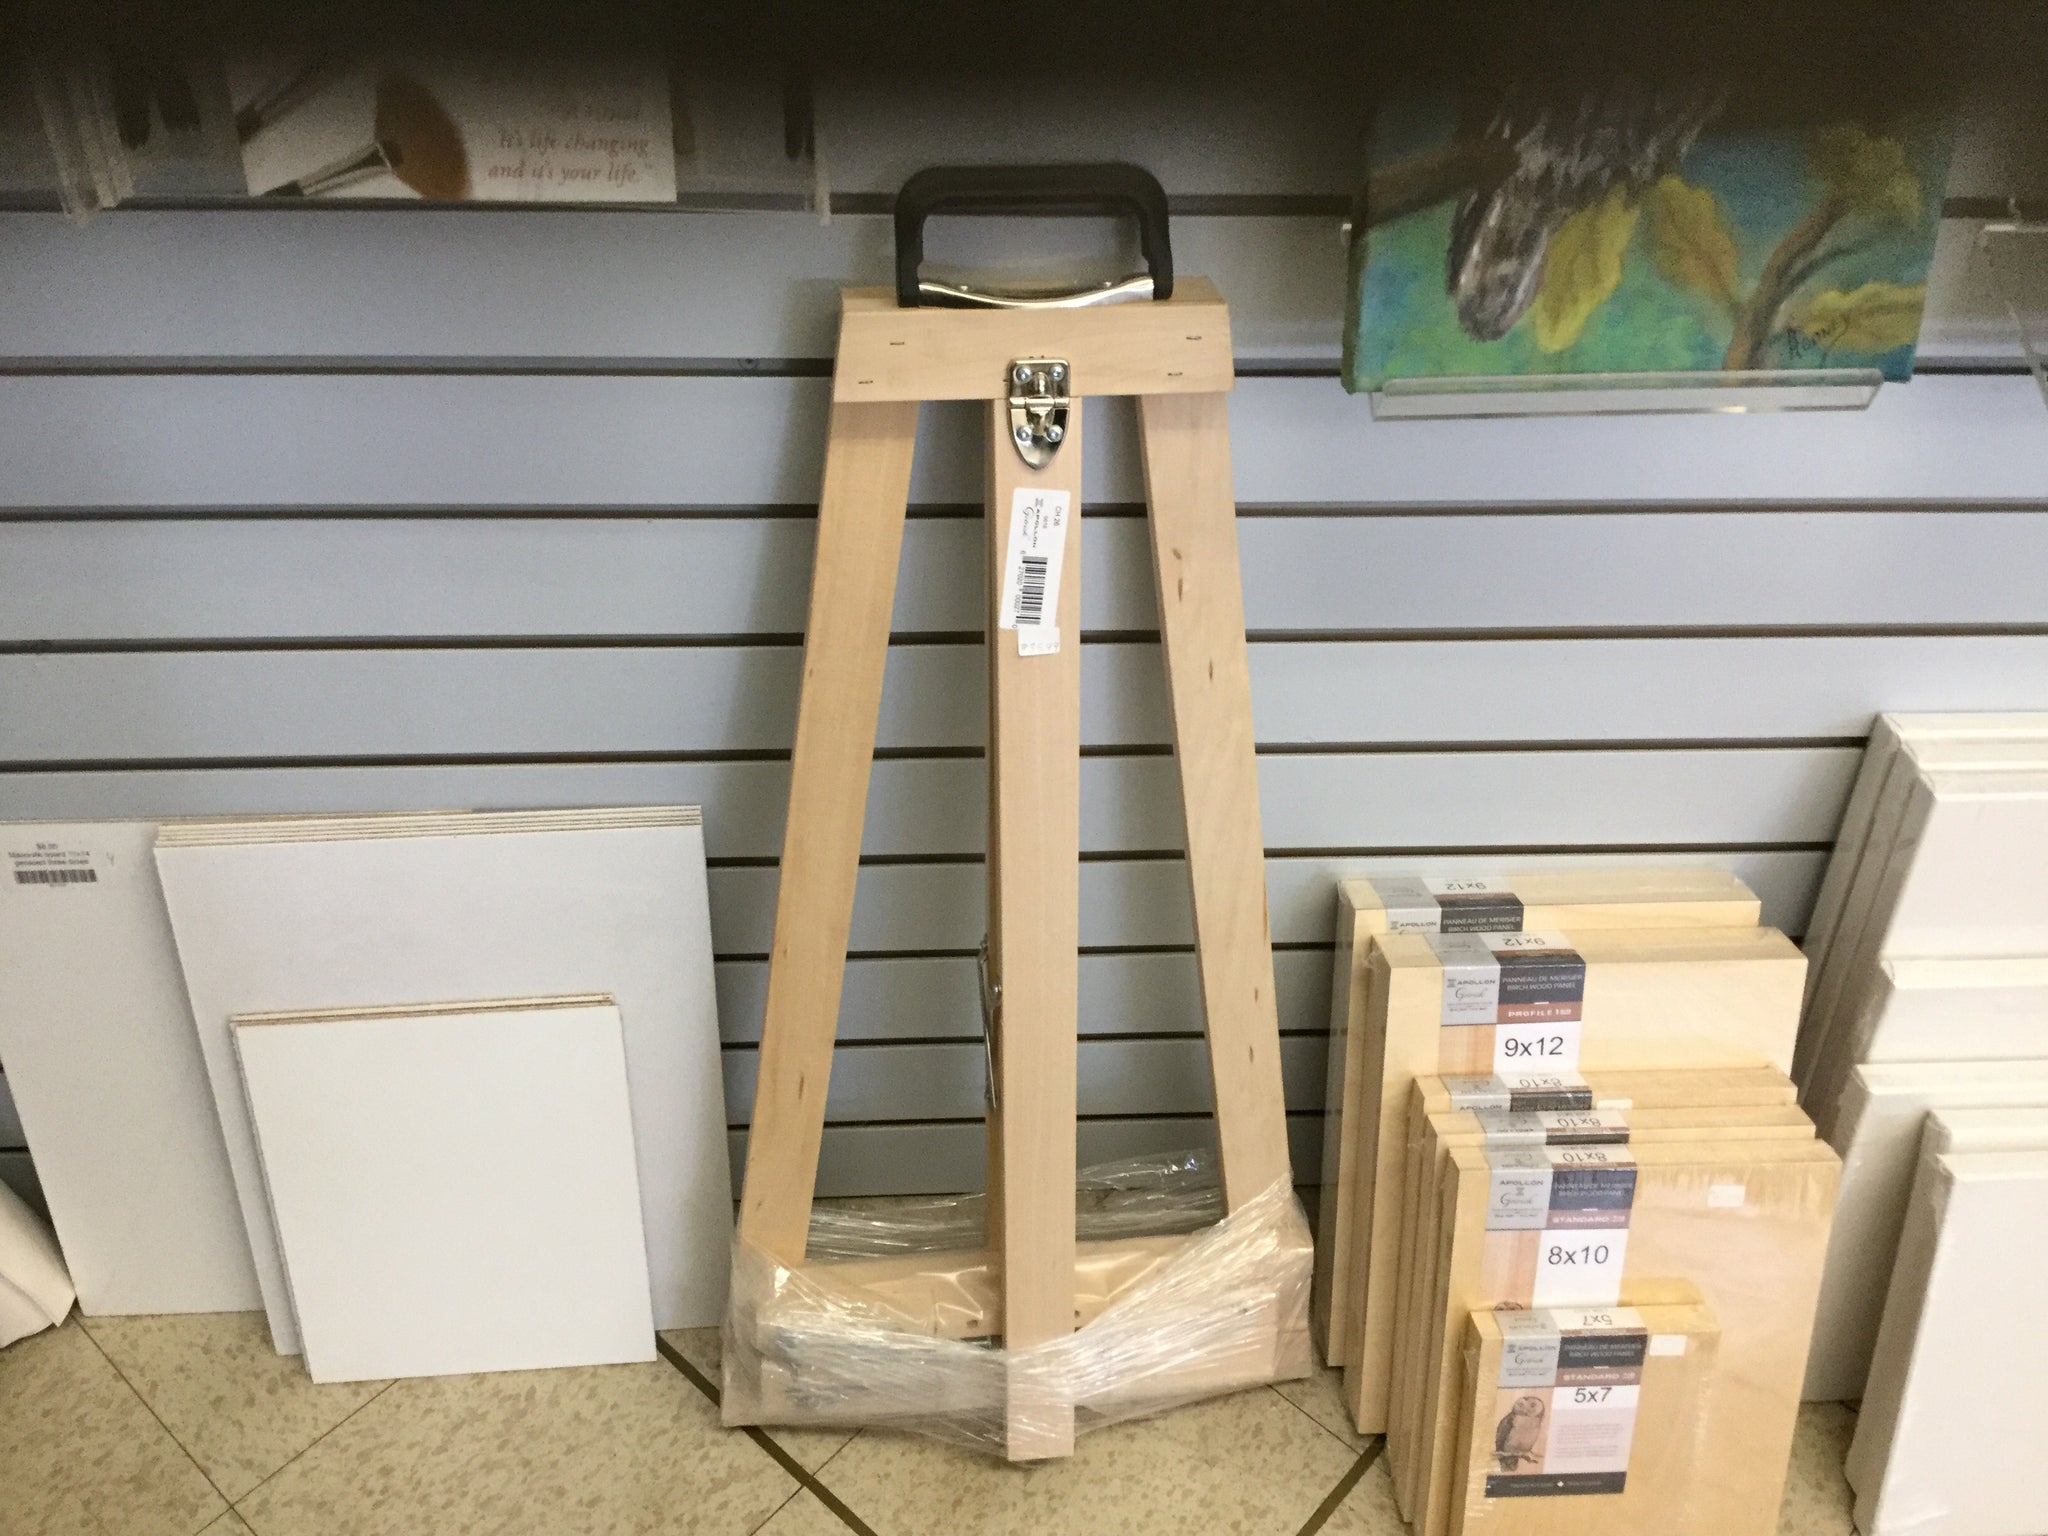 Table carry easels 26” by Apollon Gotrick